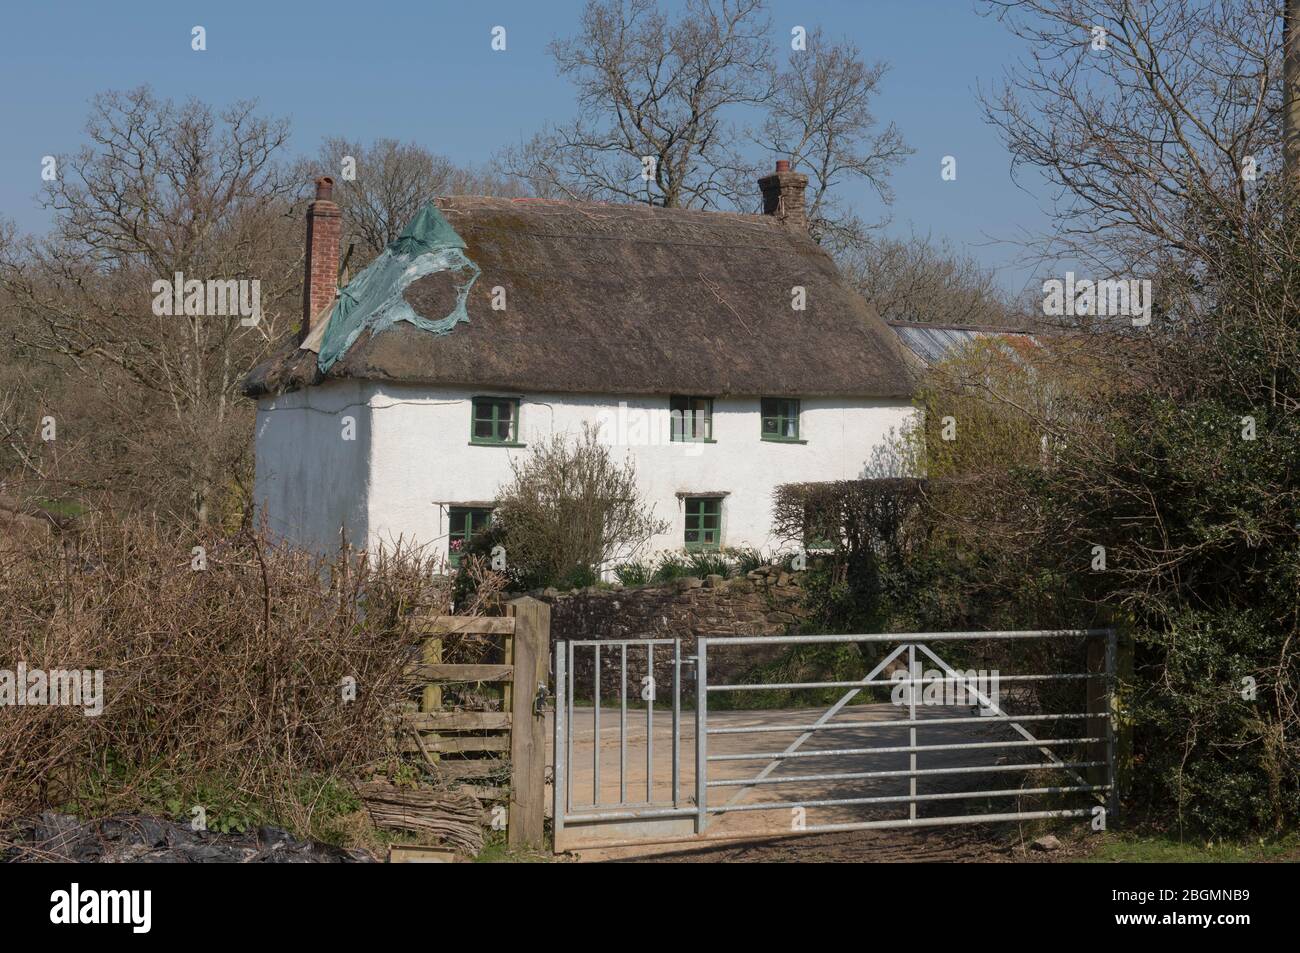 Traditional Devonian Cob and Lime Thatched Roof Cottage on a Quiet Country Lane in the Rural Devon Countryside, England, UK Stock Photo